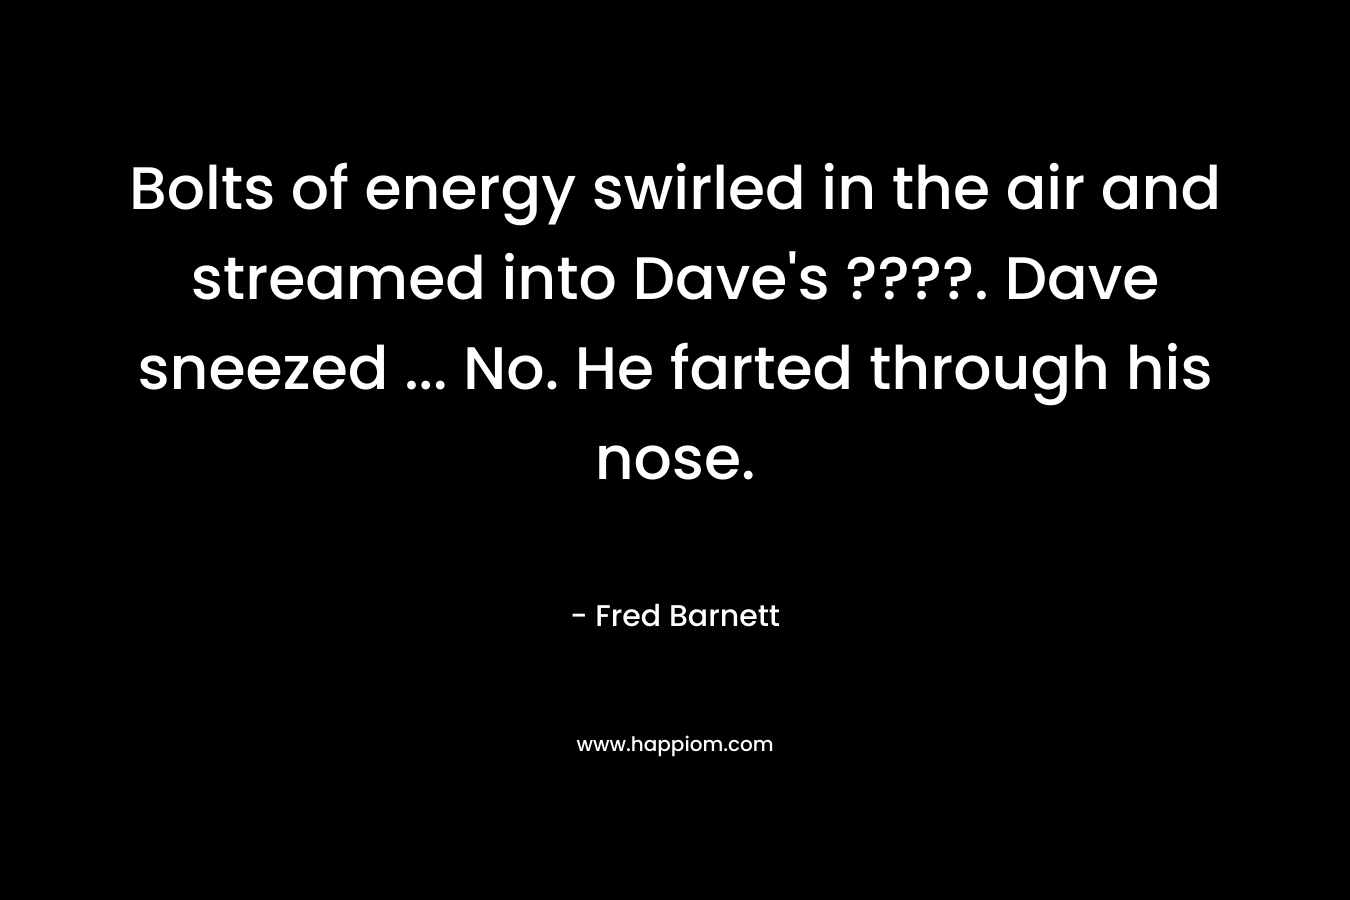 Bolts of energy swirled in the air and streamed into Dave’s ????. Dave sneezed … No. He farted through his nose. – Fred Barnett